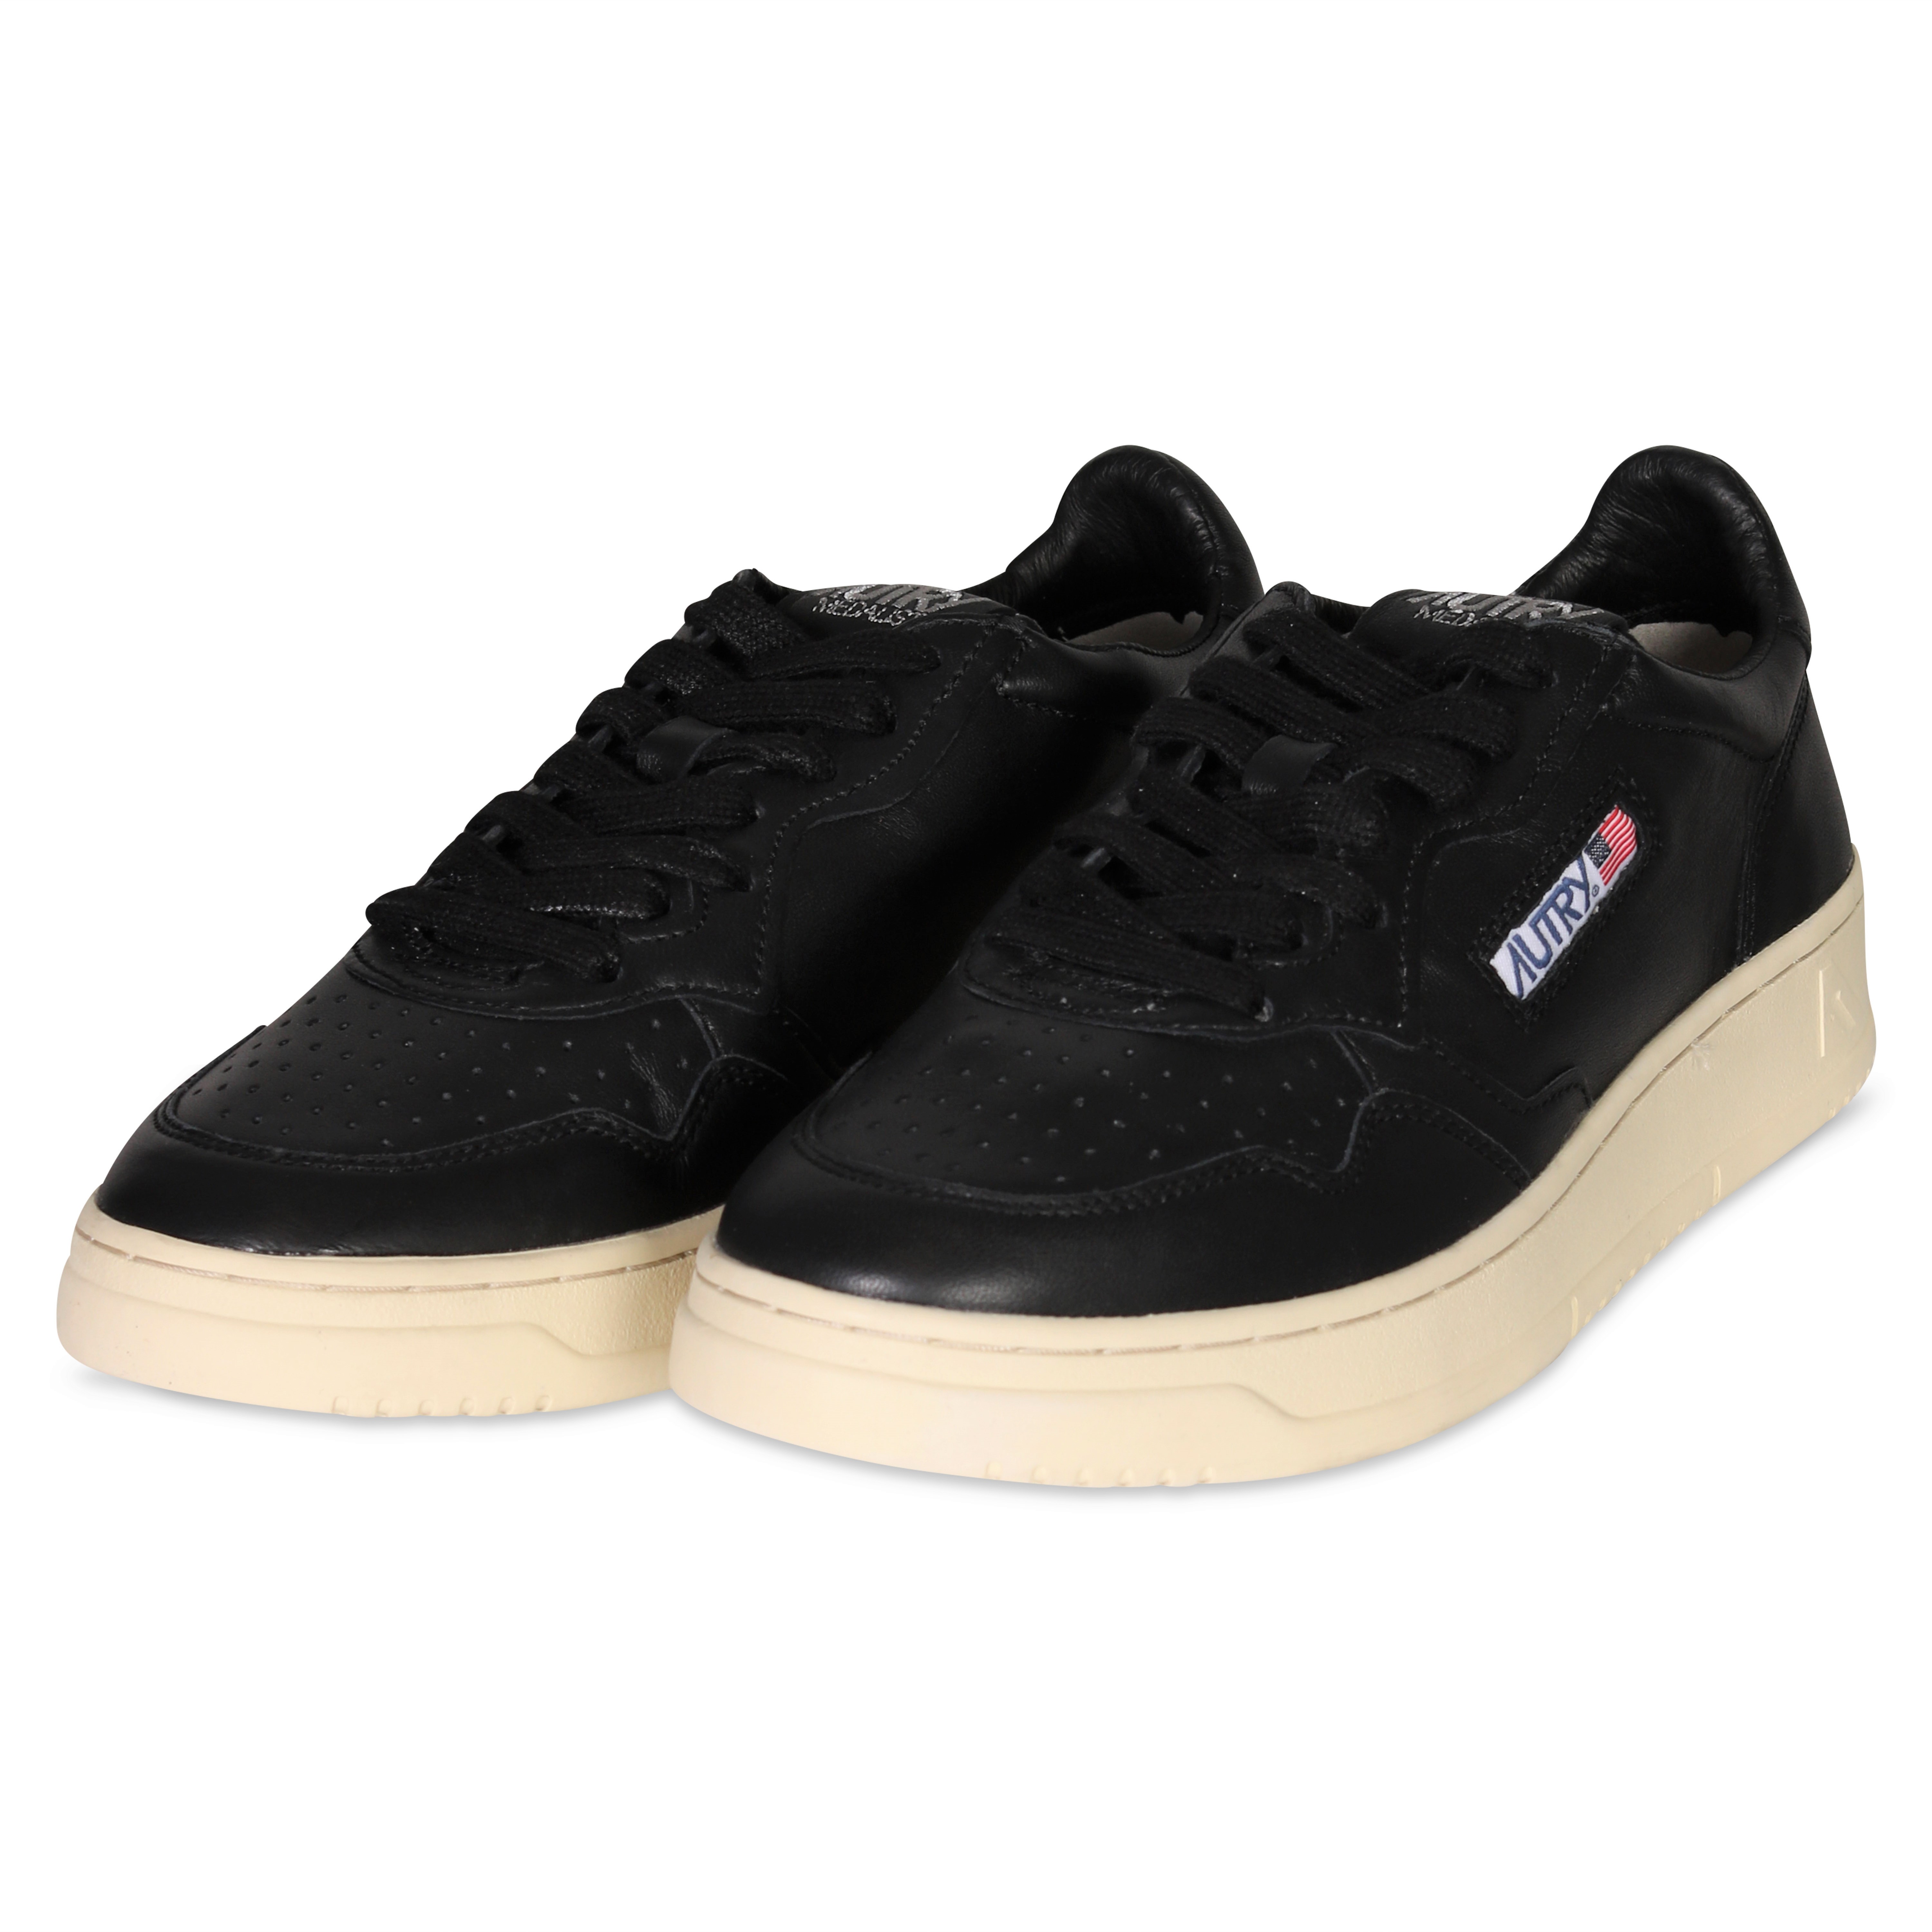 Autry Action Shoes Low Sneaker Goat in Black 35